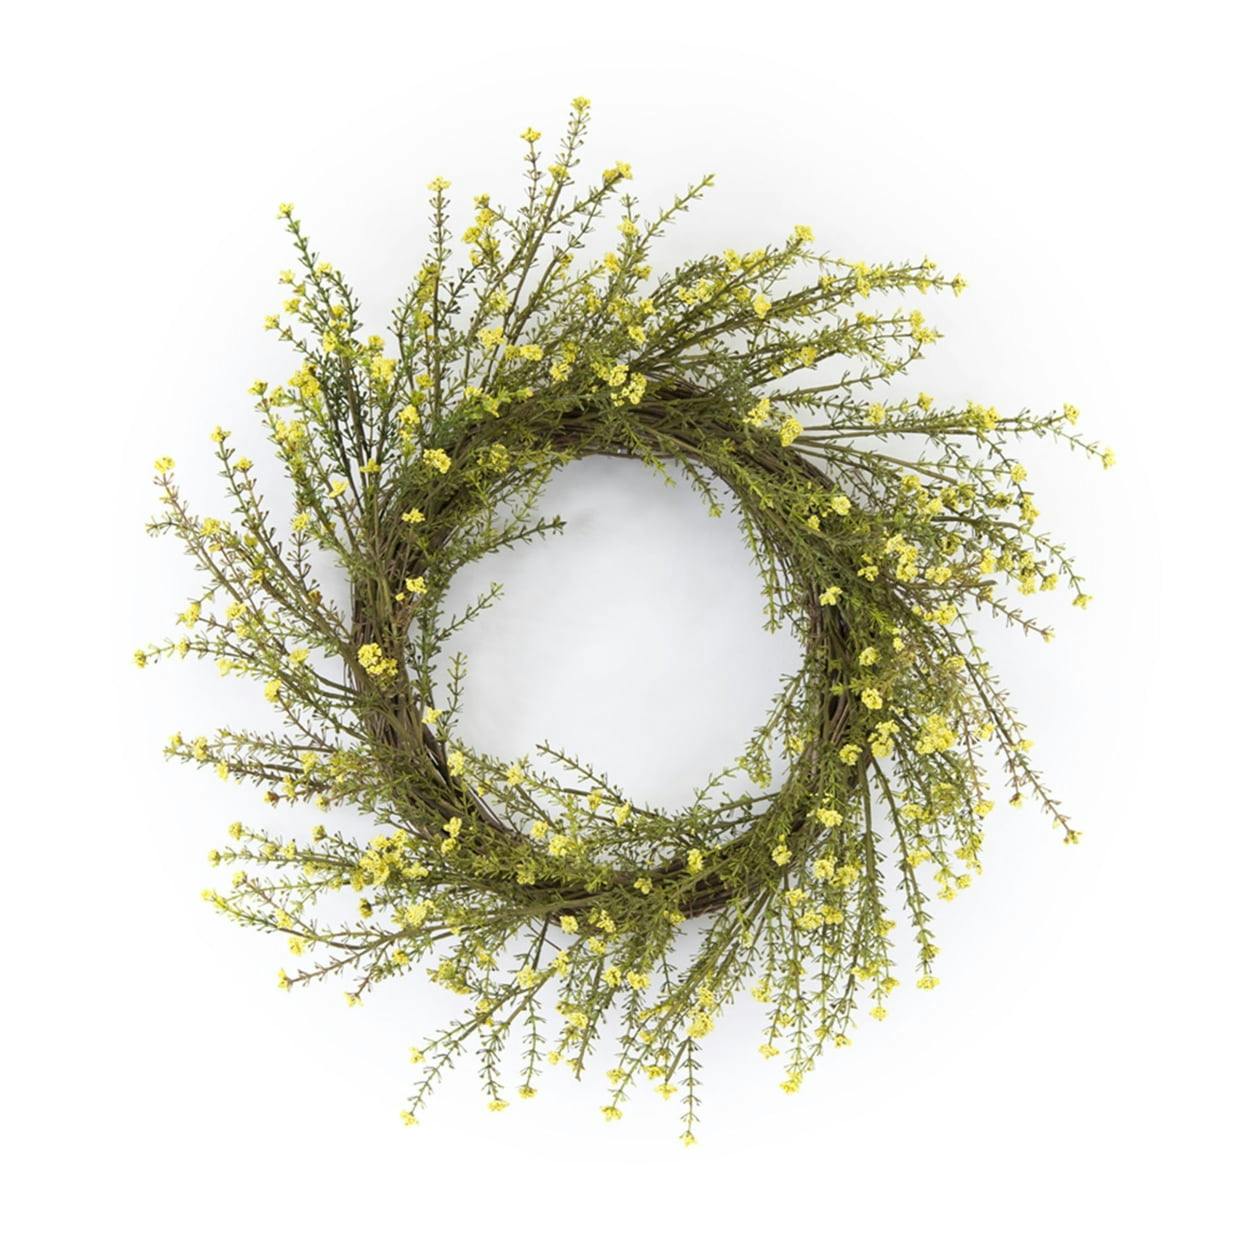 Bright Yellow Floral Mini Wreath 18"D for Front Door Decor